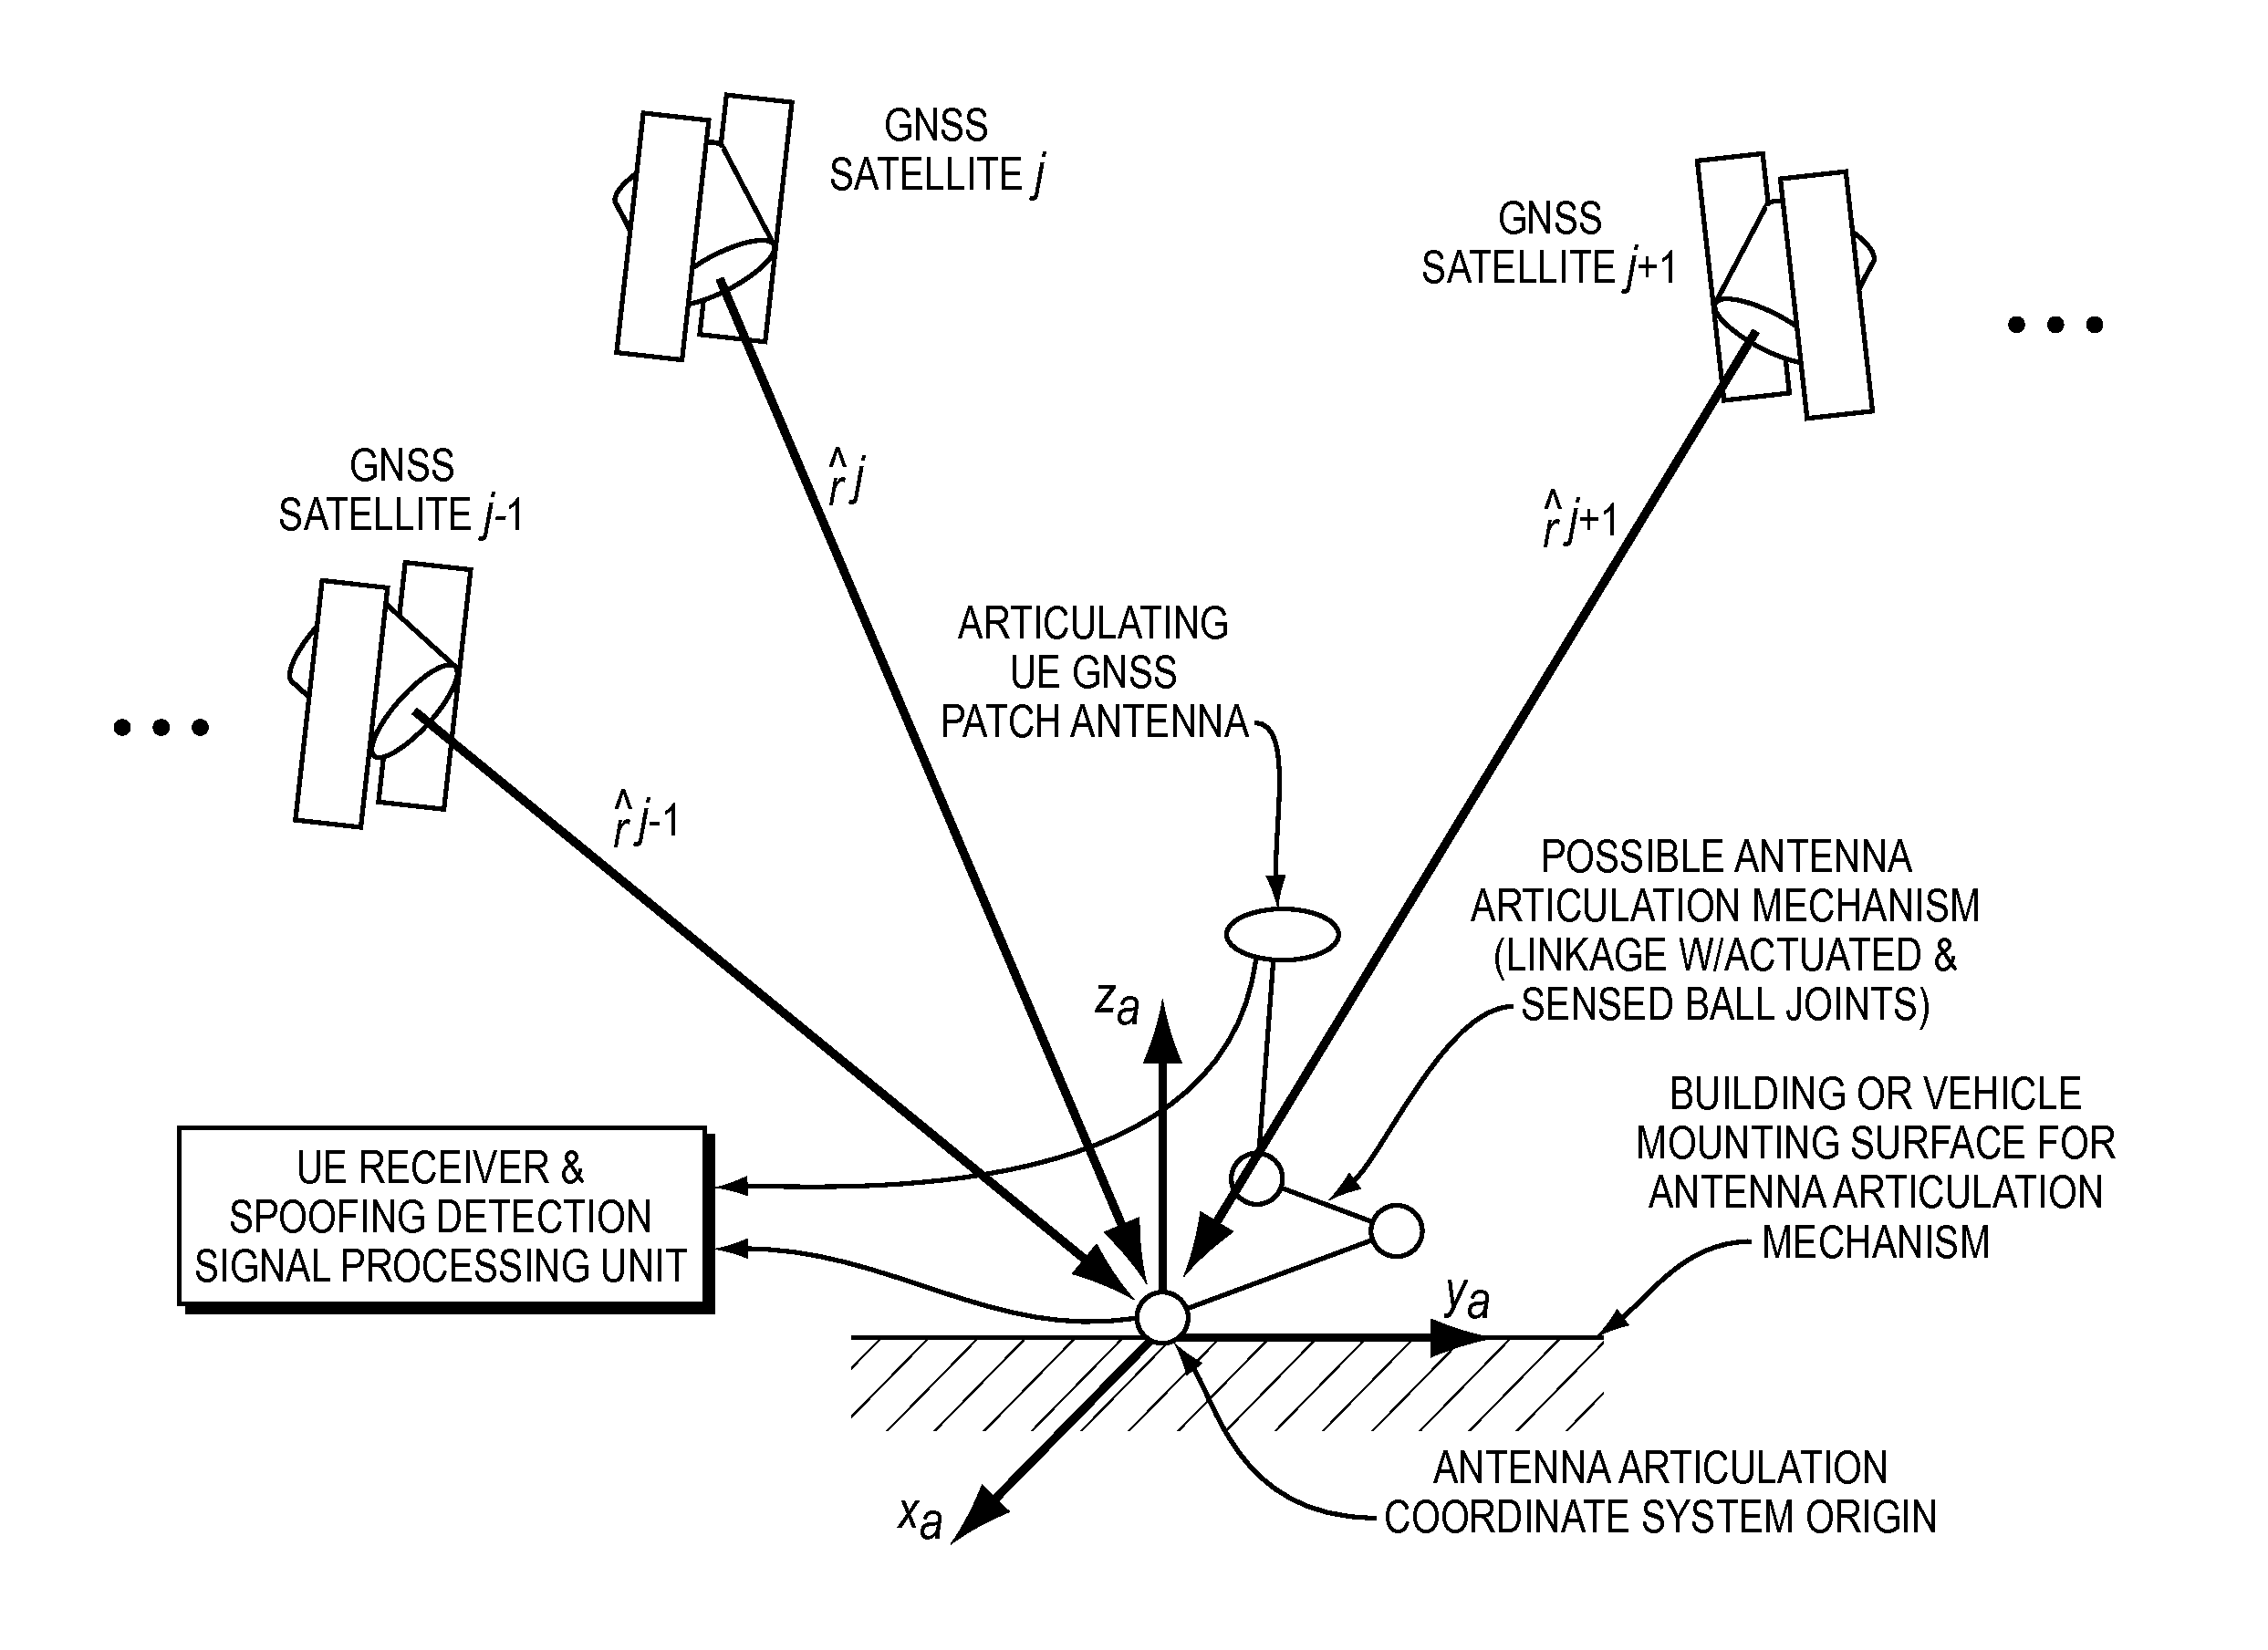 Methods and apparatus for detecting spoofing of global navigation satellite system signals using carrier phase measurements and known antenna motions